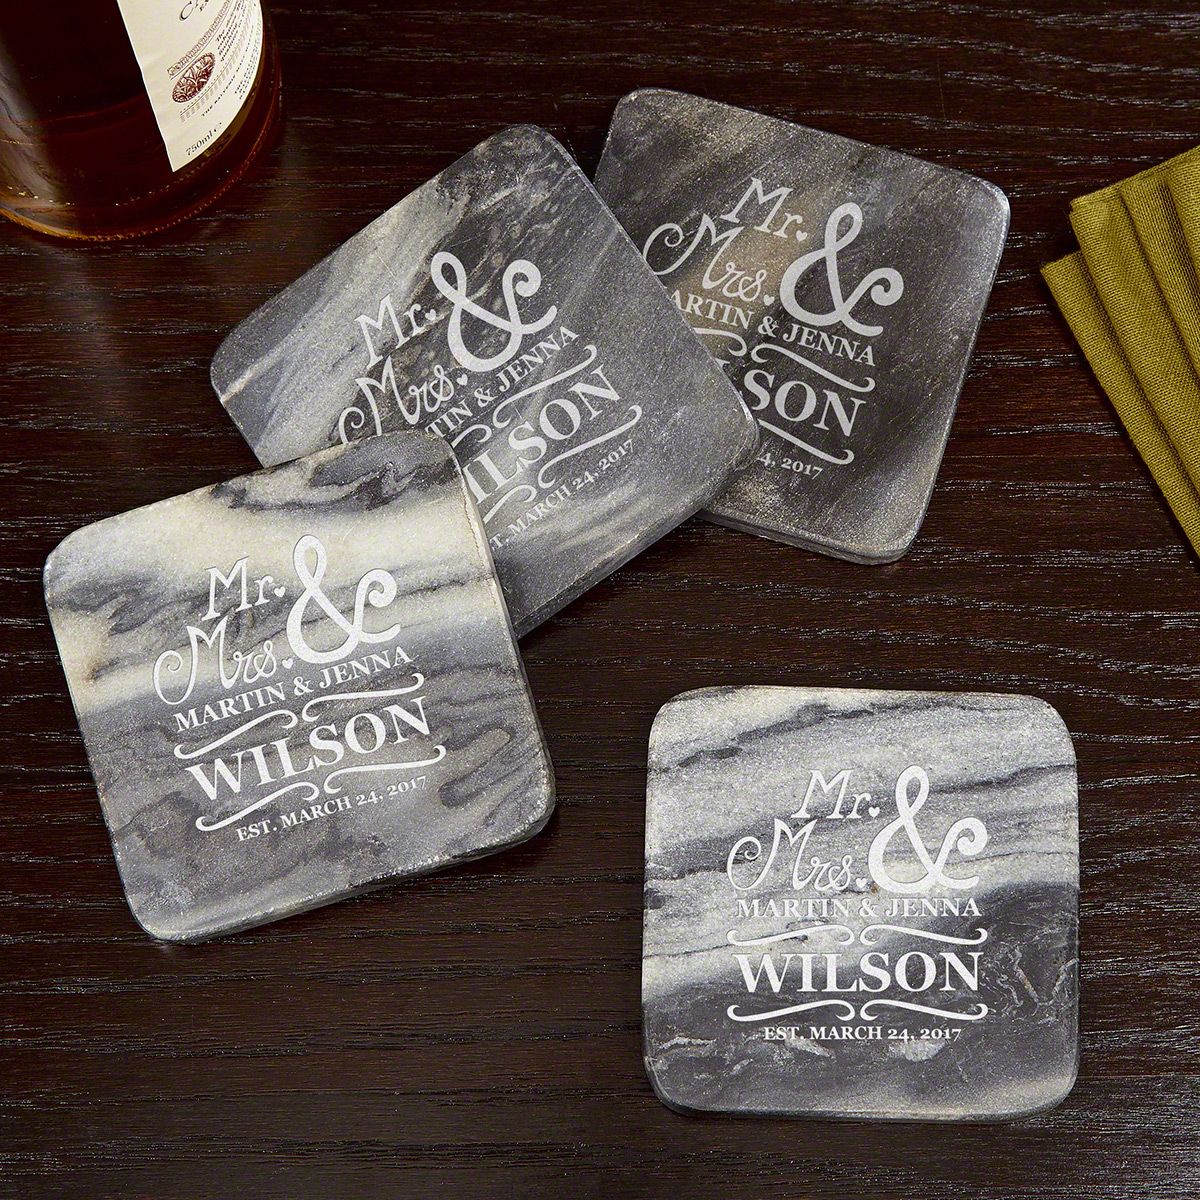 Matisse Personalized Marble Coasters, Set of 4